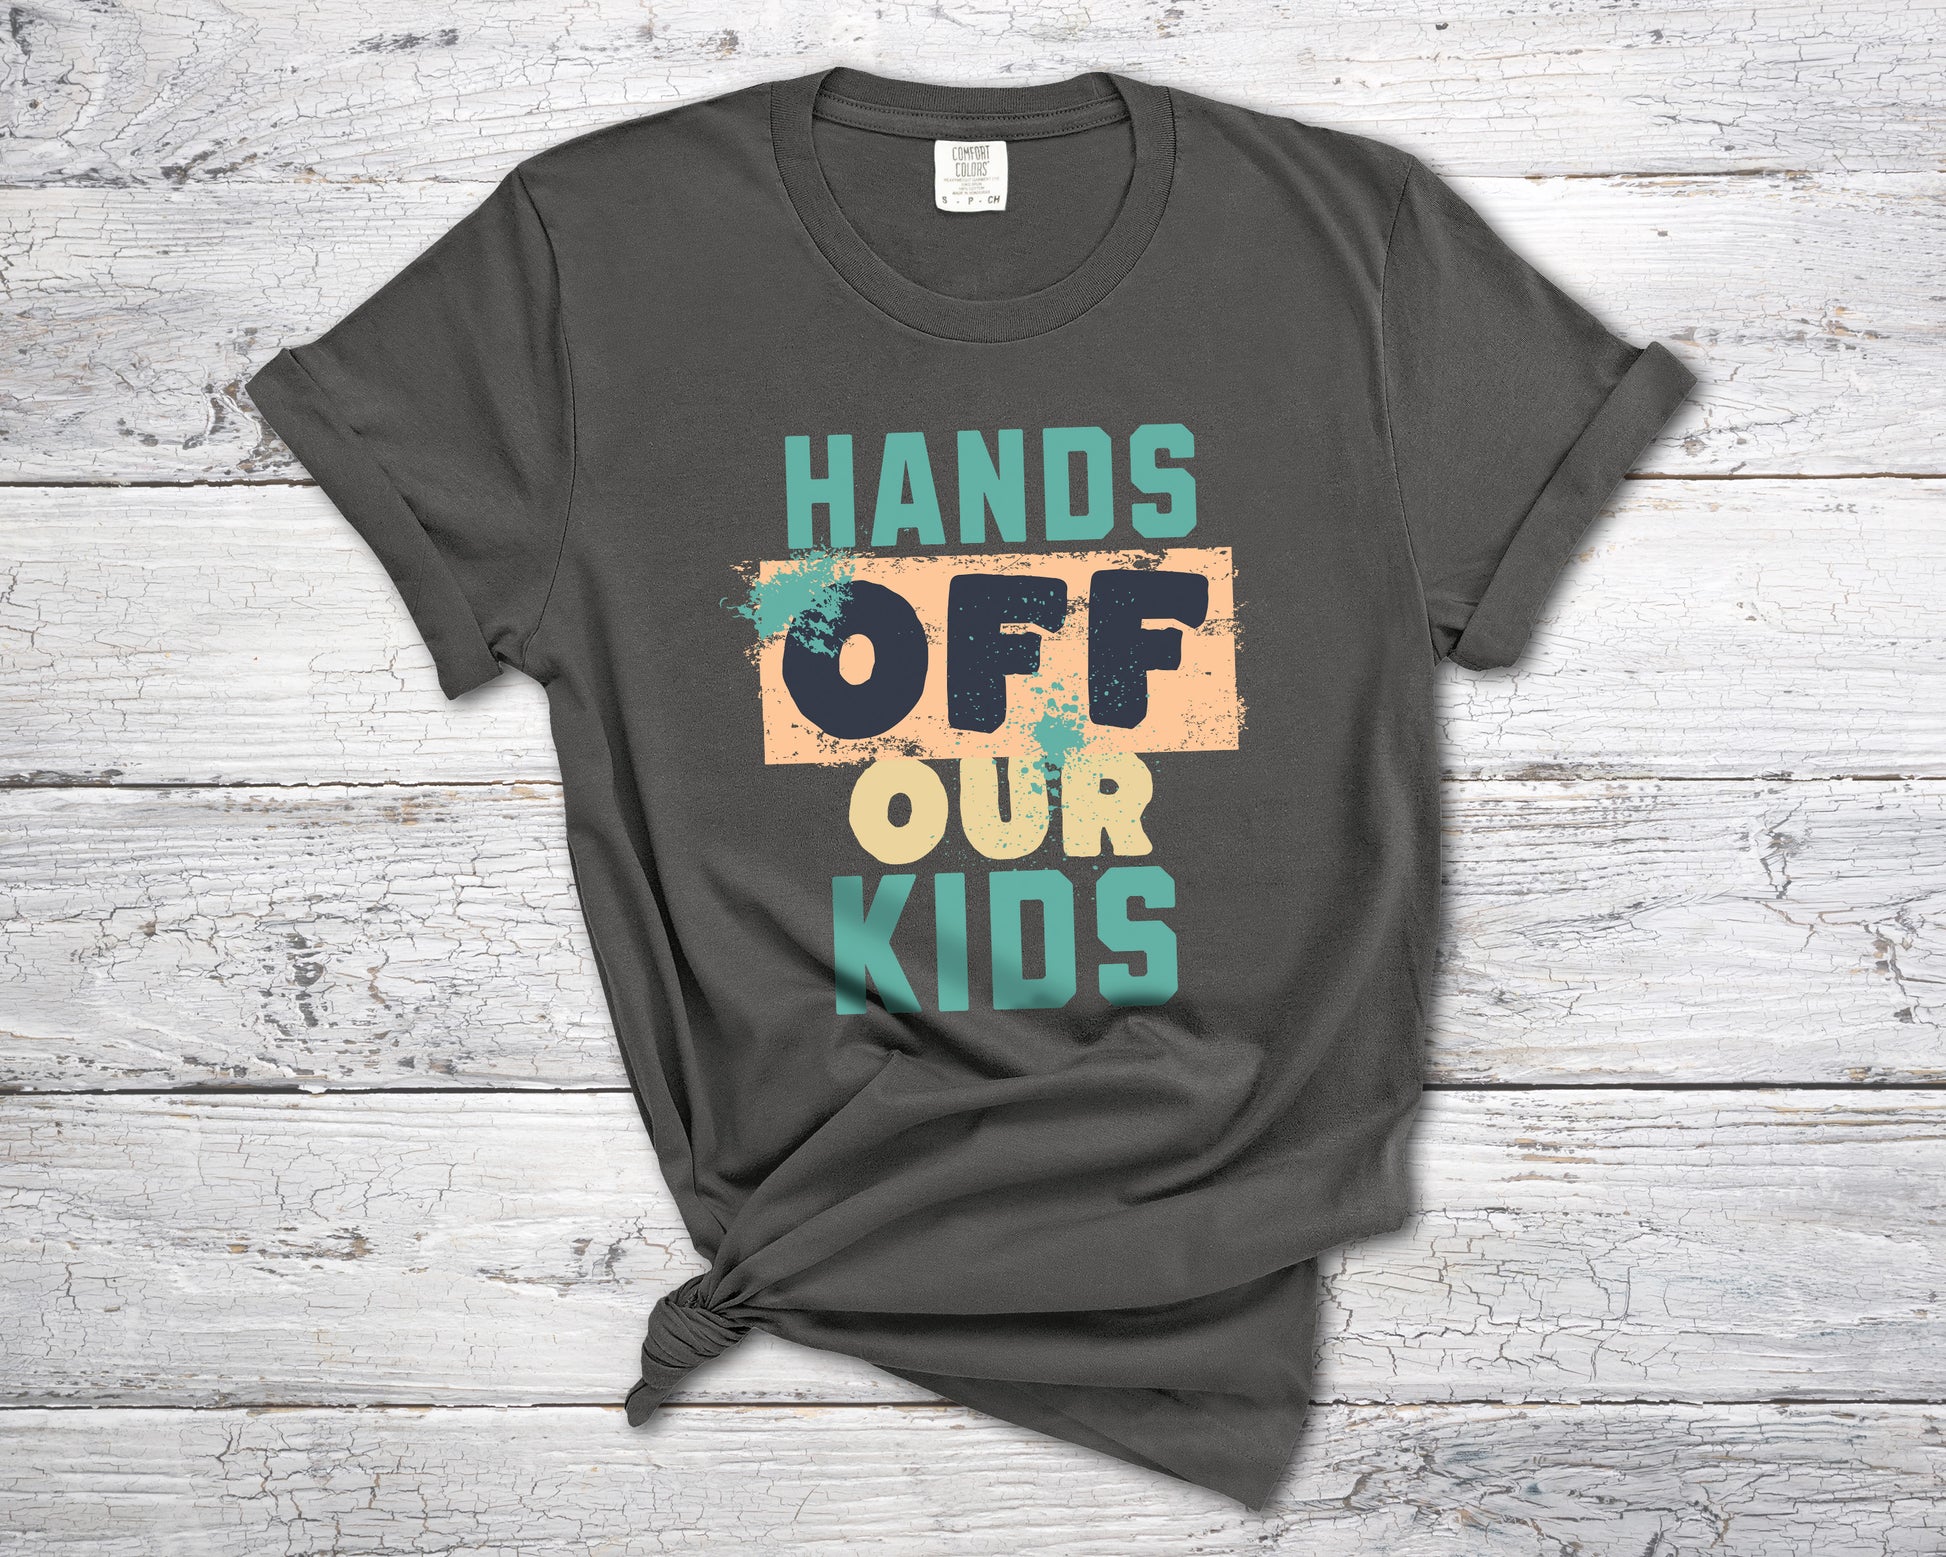 Parent tshirt for protective parents concerned about CRT and LGBTQ agenda in schools-T-Shirts-PureDesignTees